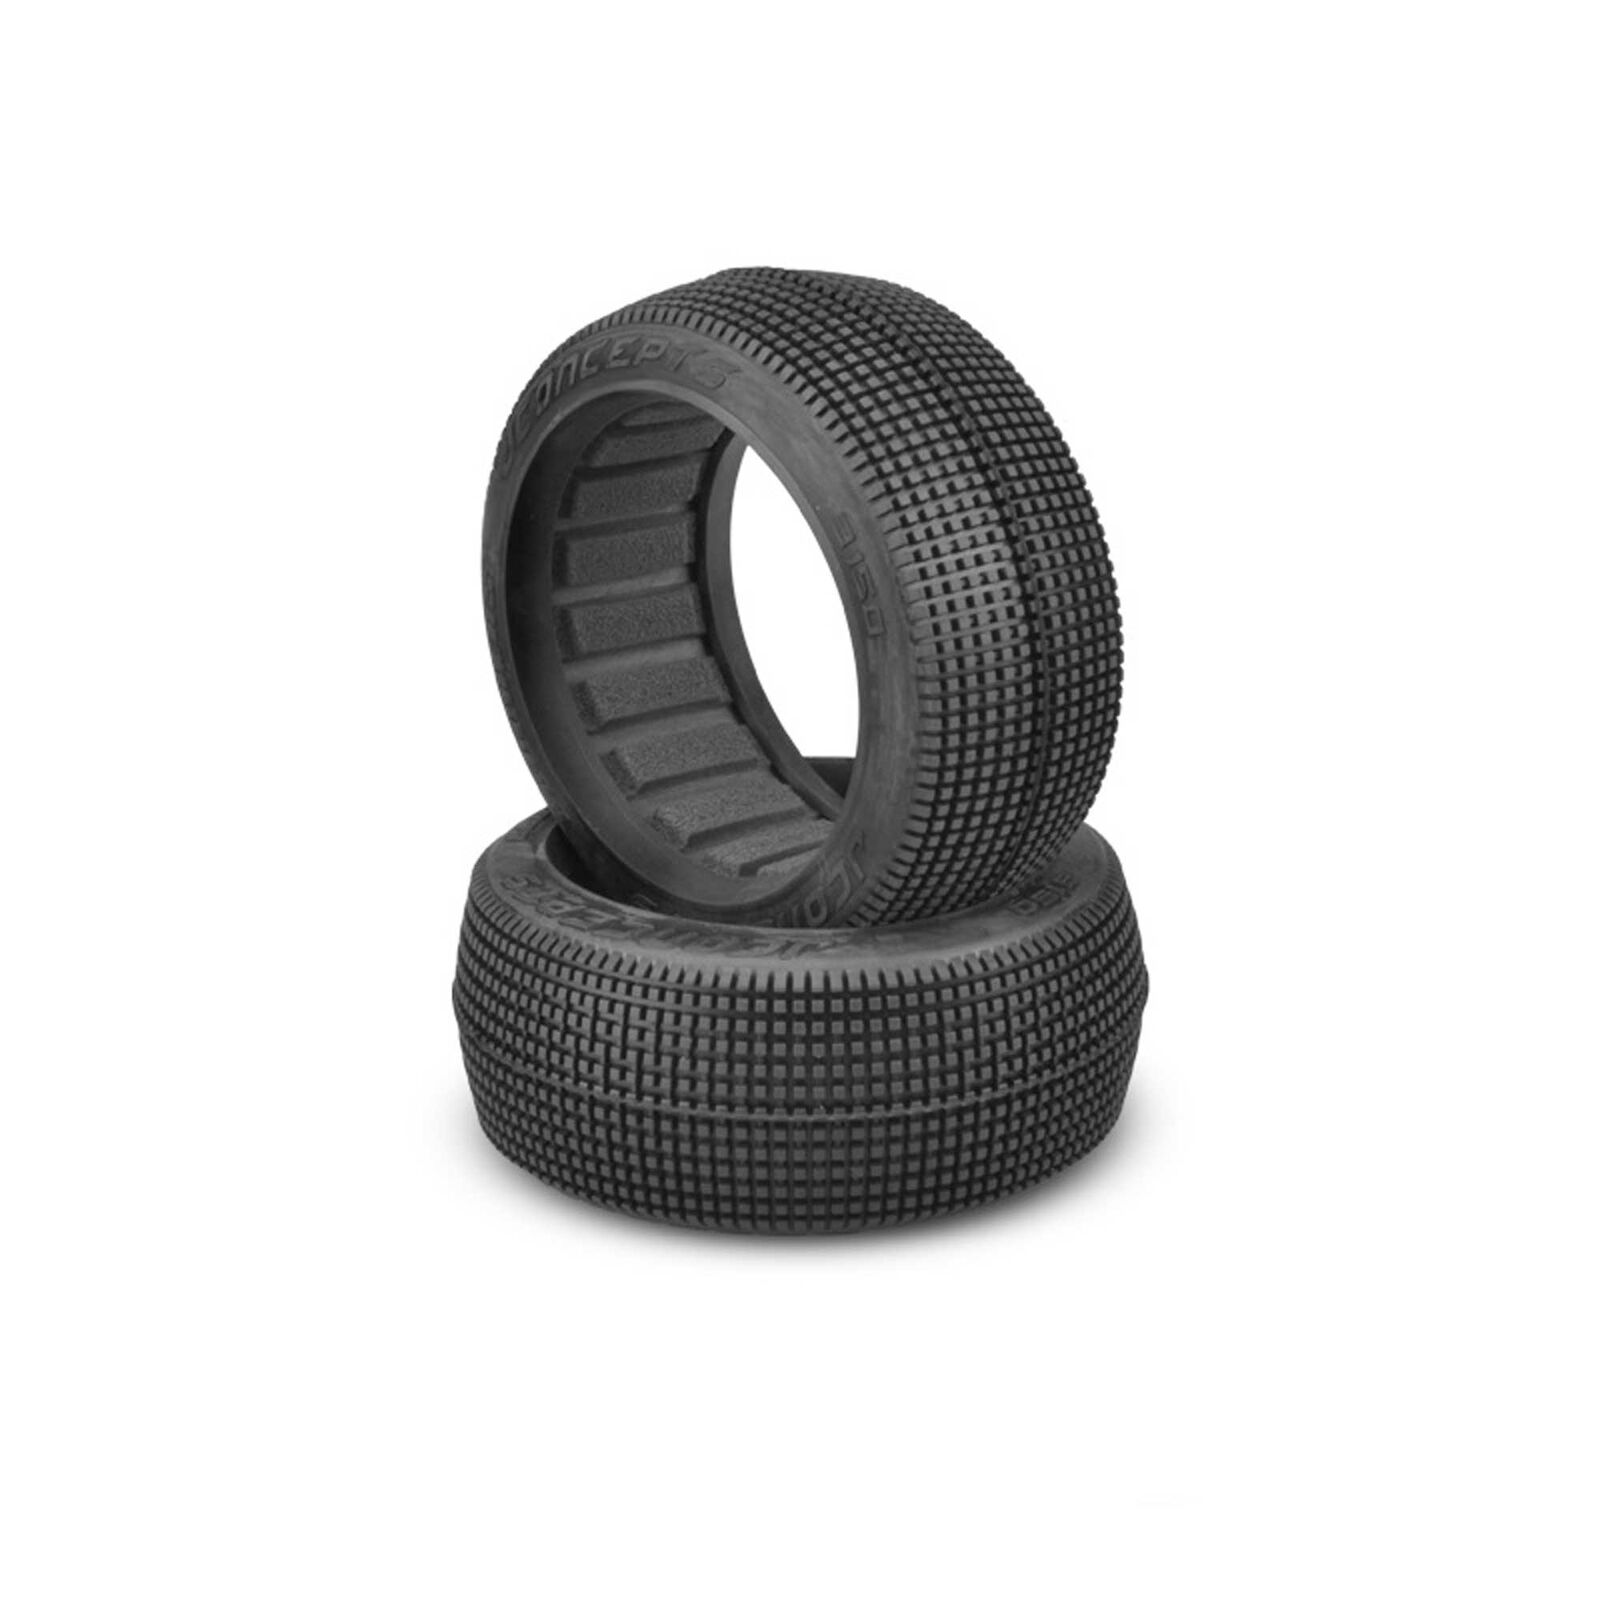 1/8 Blockers 83mm Buggy Tires and Inserts, O2 Compound (2)